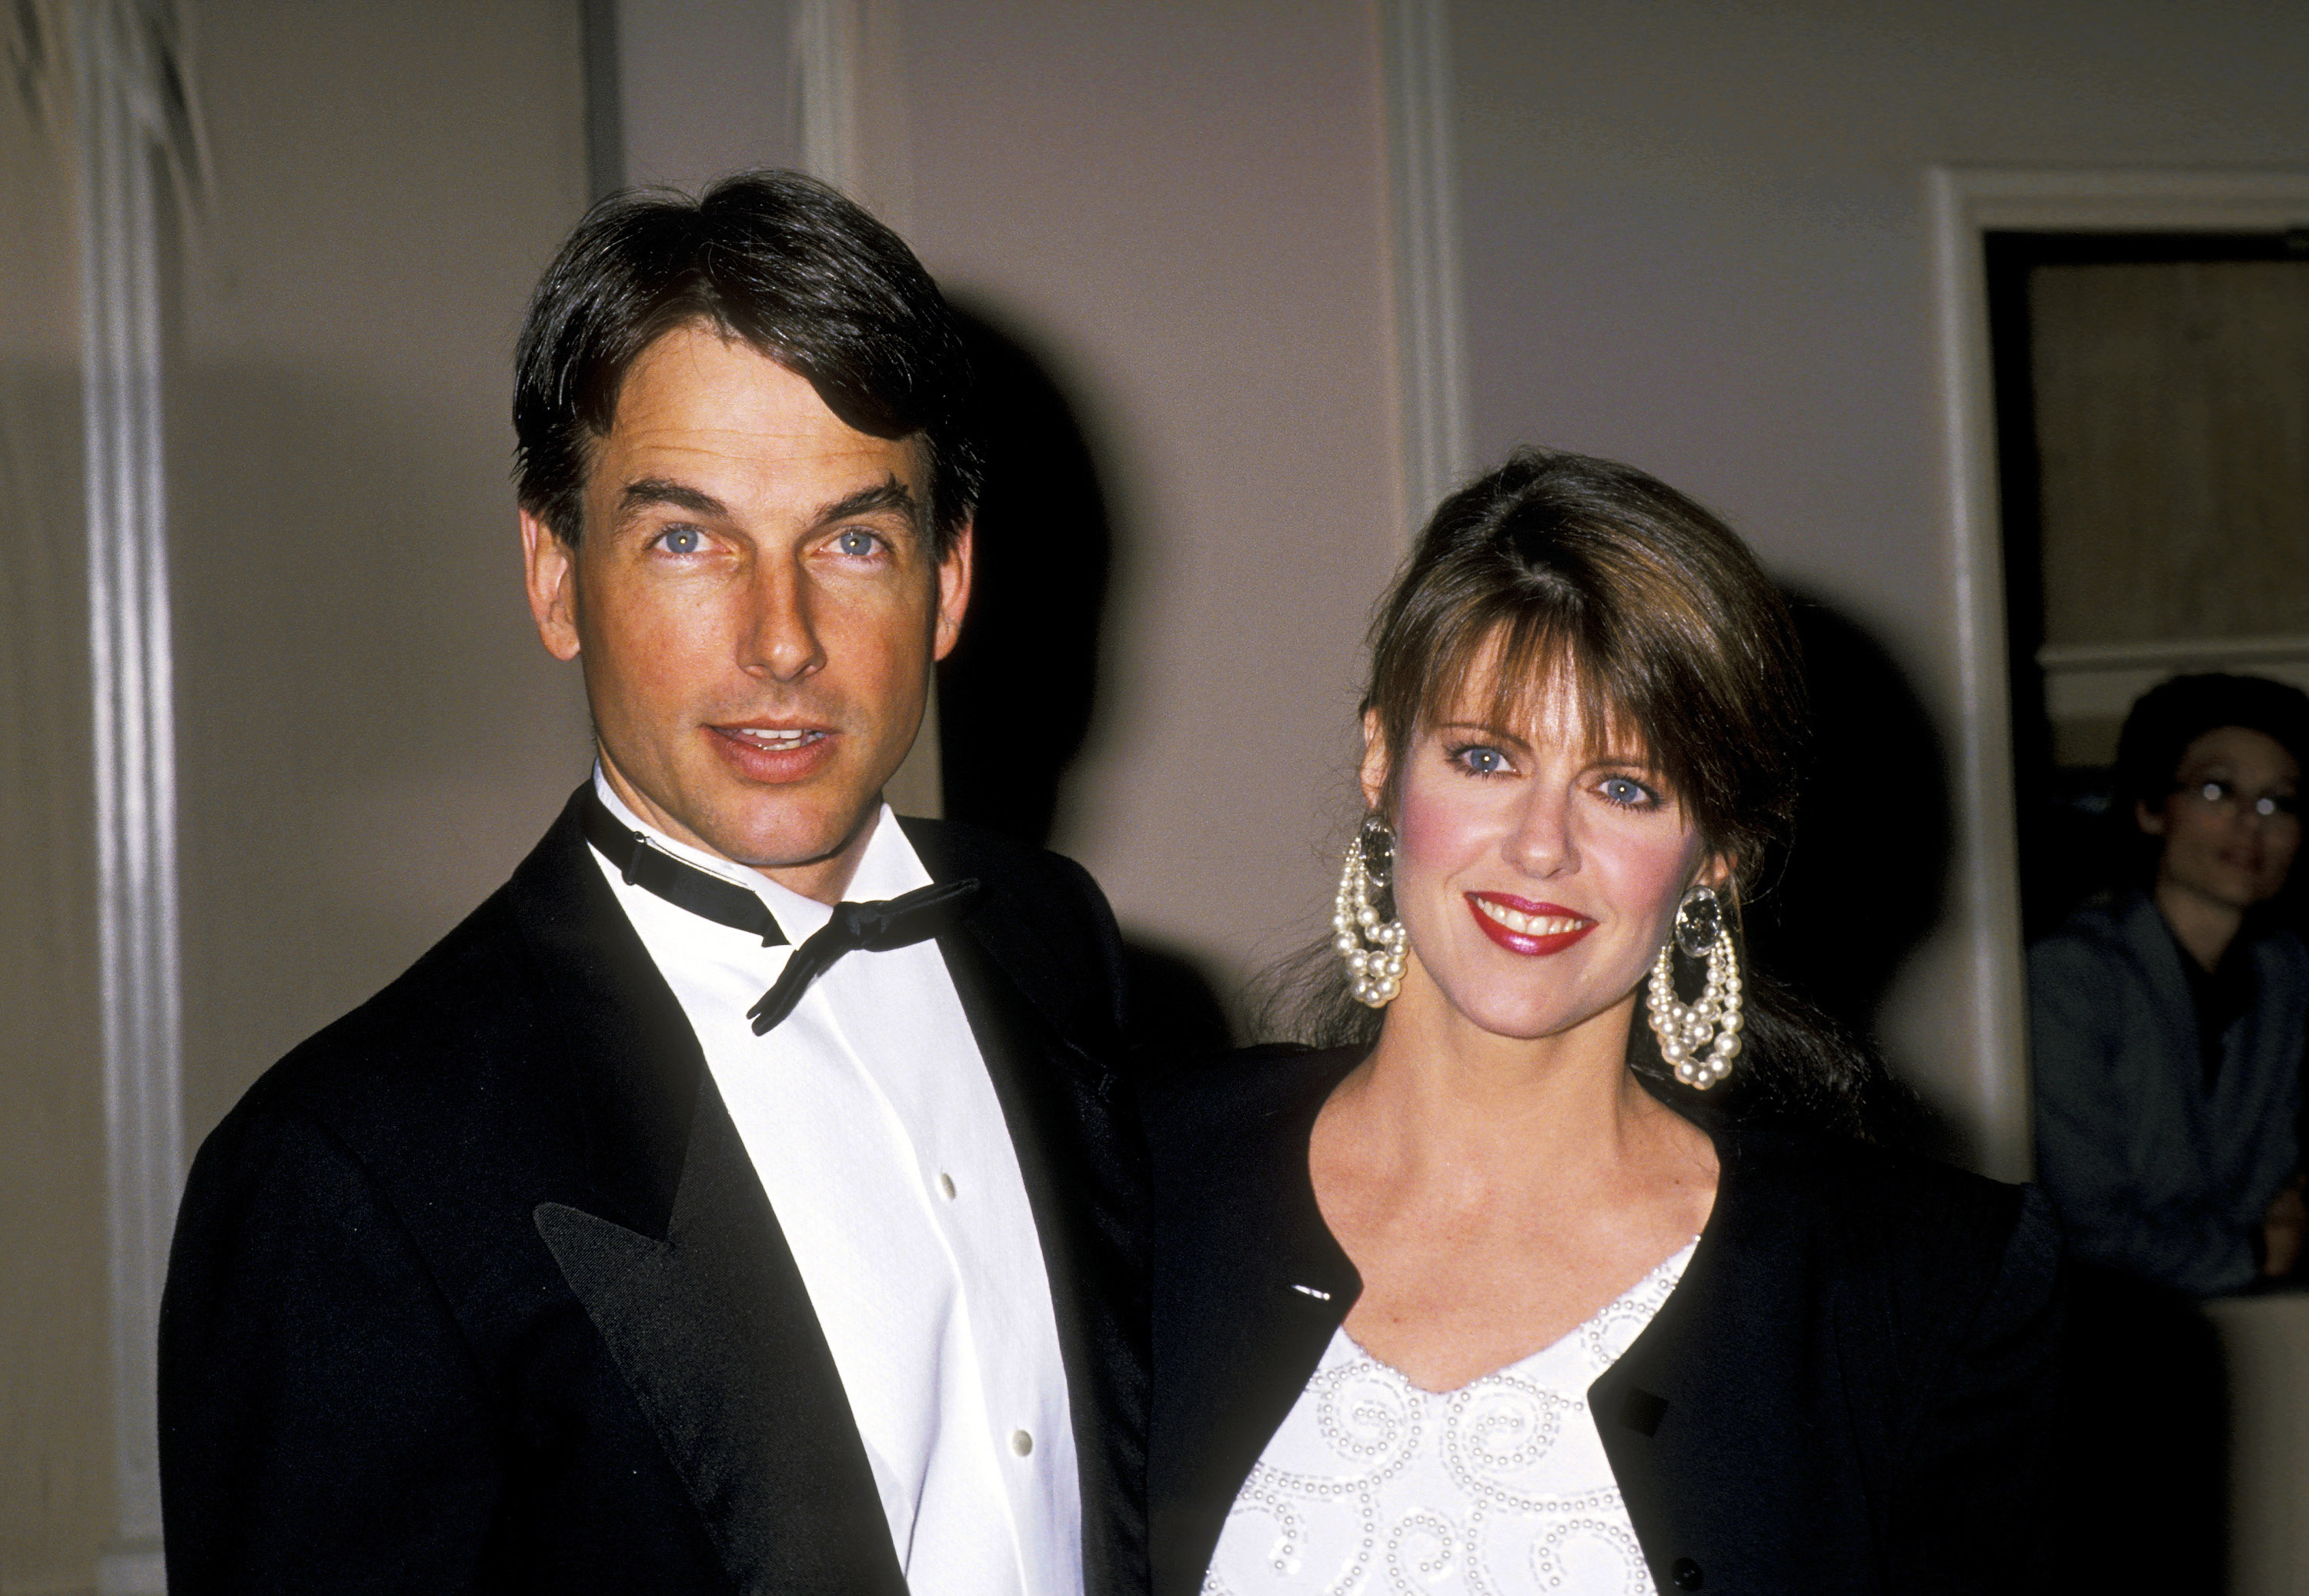 Mark Harmon and Pam Dawber at the American Film Institute in 1989 | Source: Getty Images